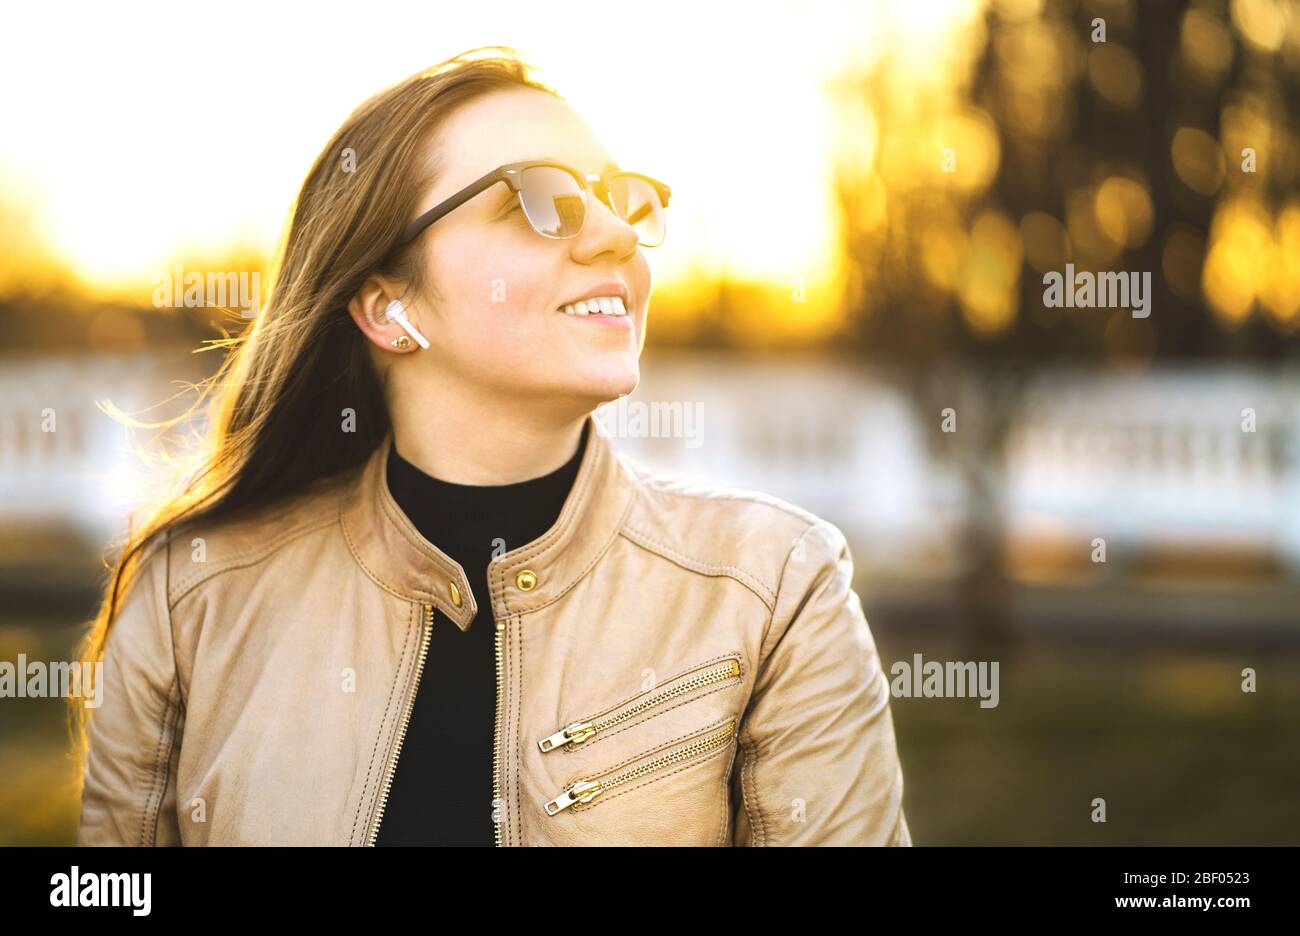 Wireless headphones, earbuds. Woman listening to music with earpods in a park. Happy young lady smiling. Sunglasses and leather jacket. Stock Photo